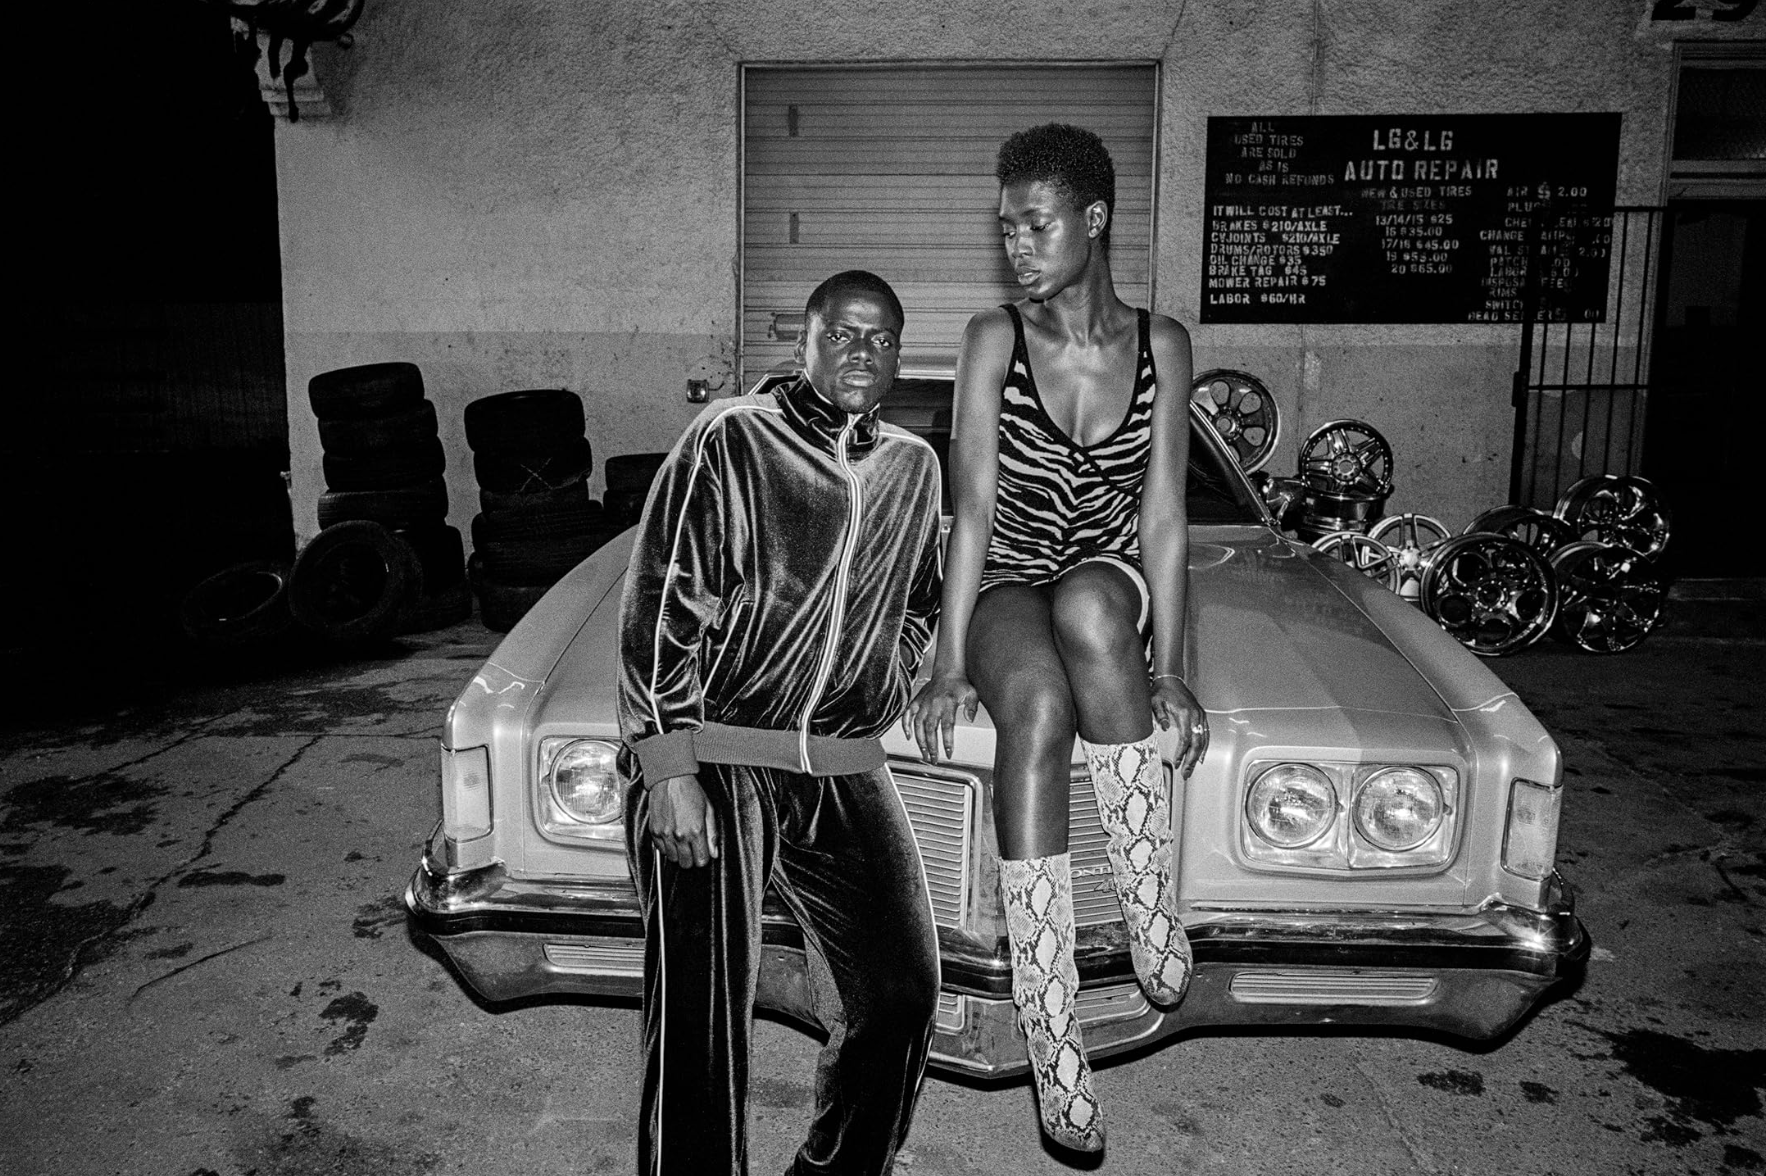 Daniel Kaluuya, left, and Jodie Turner-Smith, right, star in the 2019 film Queen & Slim. Photo by Andre D. Wagner/ Universal Pictures